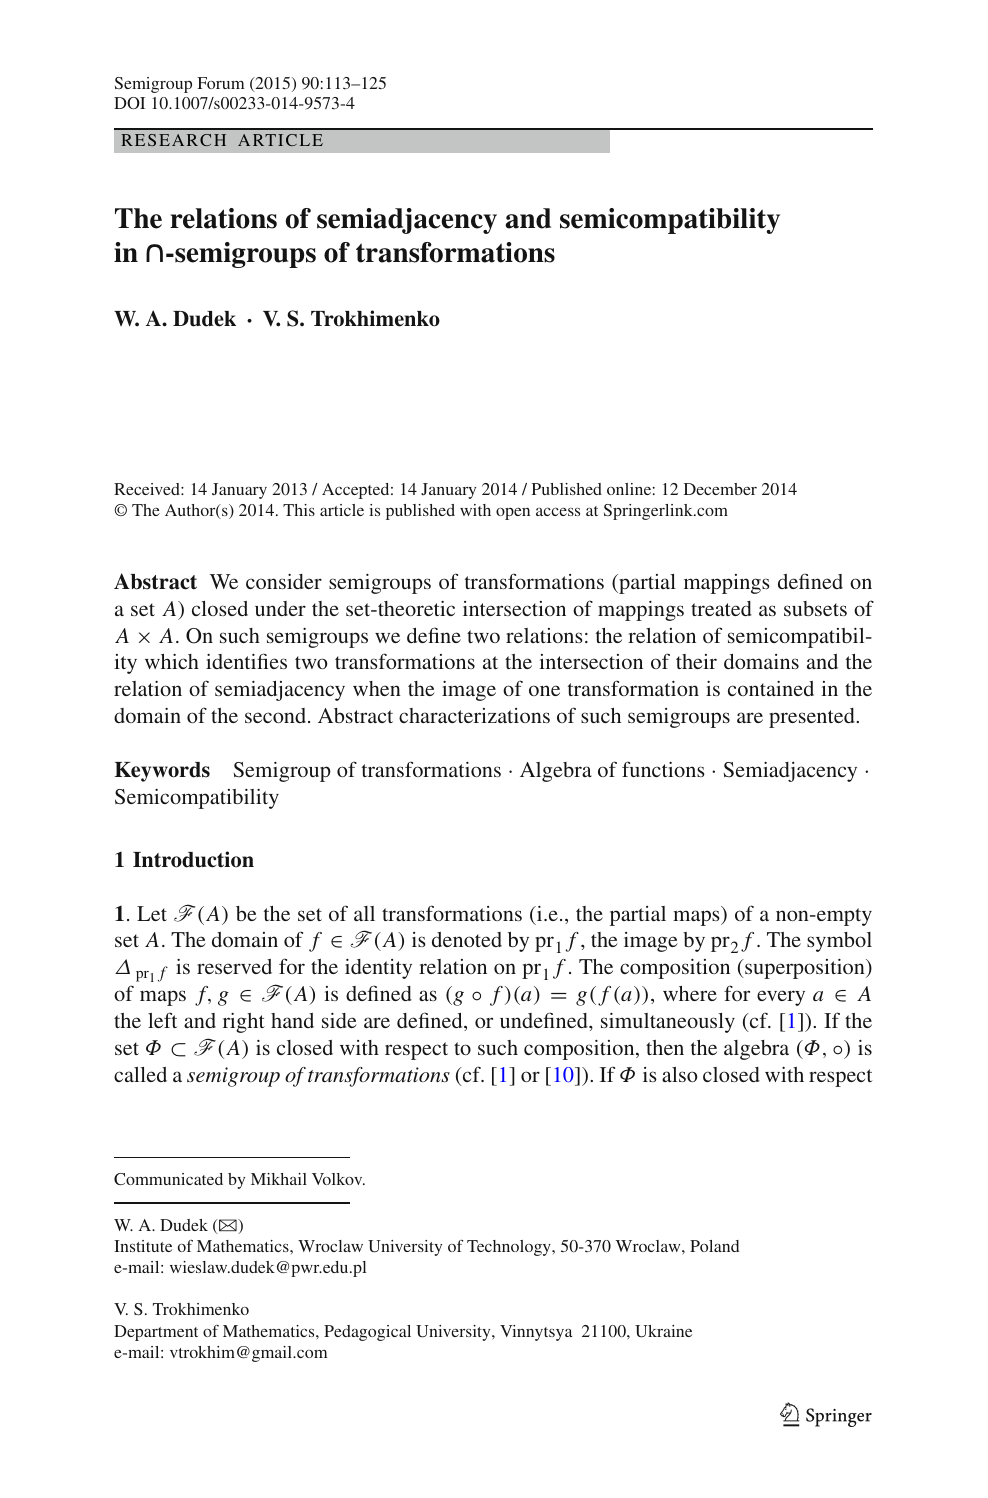 The Relations Of Semiadjacency And Semicompatibility In Cap Semigroups Of Transformations Topic Of Research Paper In Mathematics Download Scholarly Article Pdf And Read For Free On Cyberleninka Open Science Hub